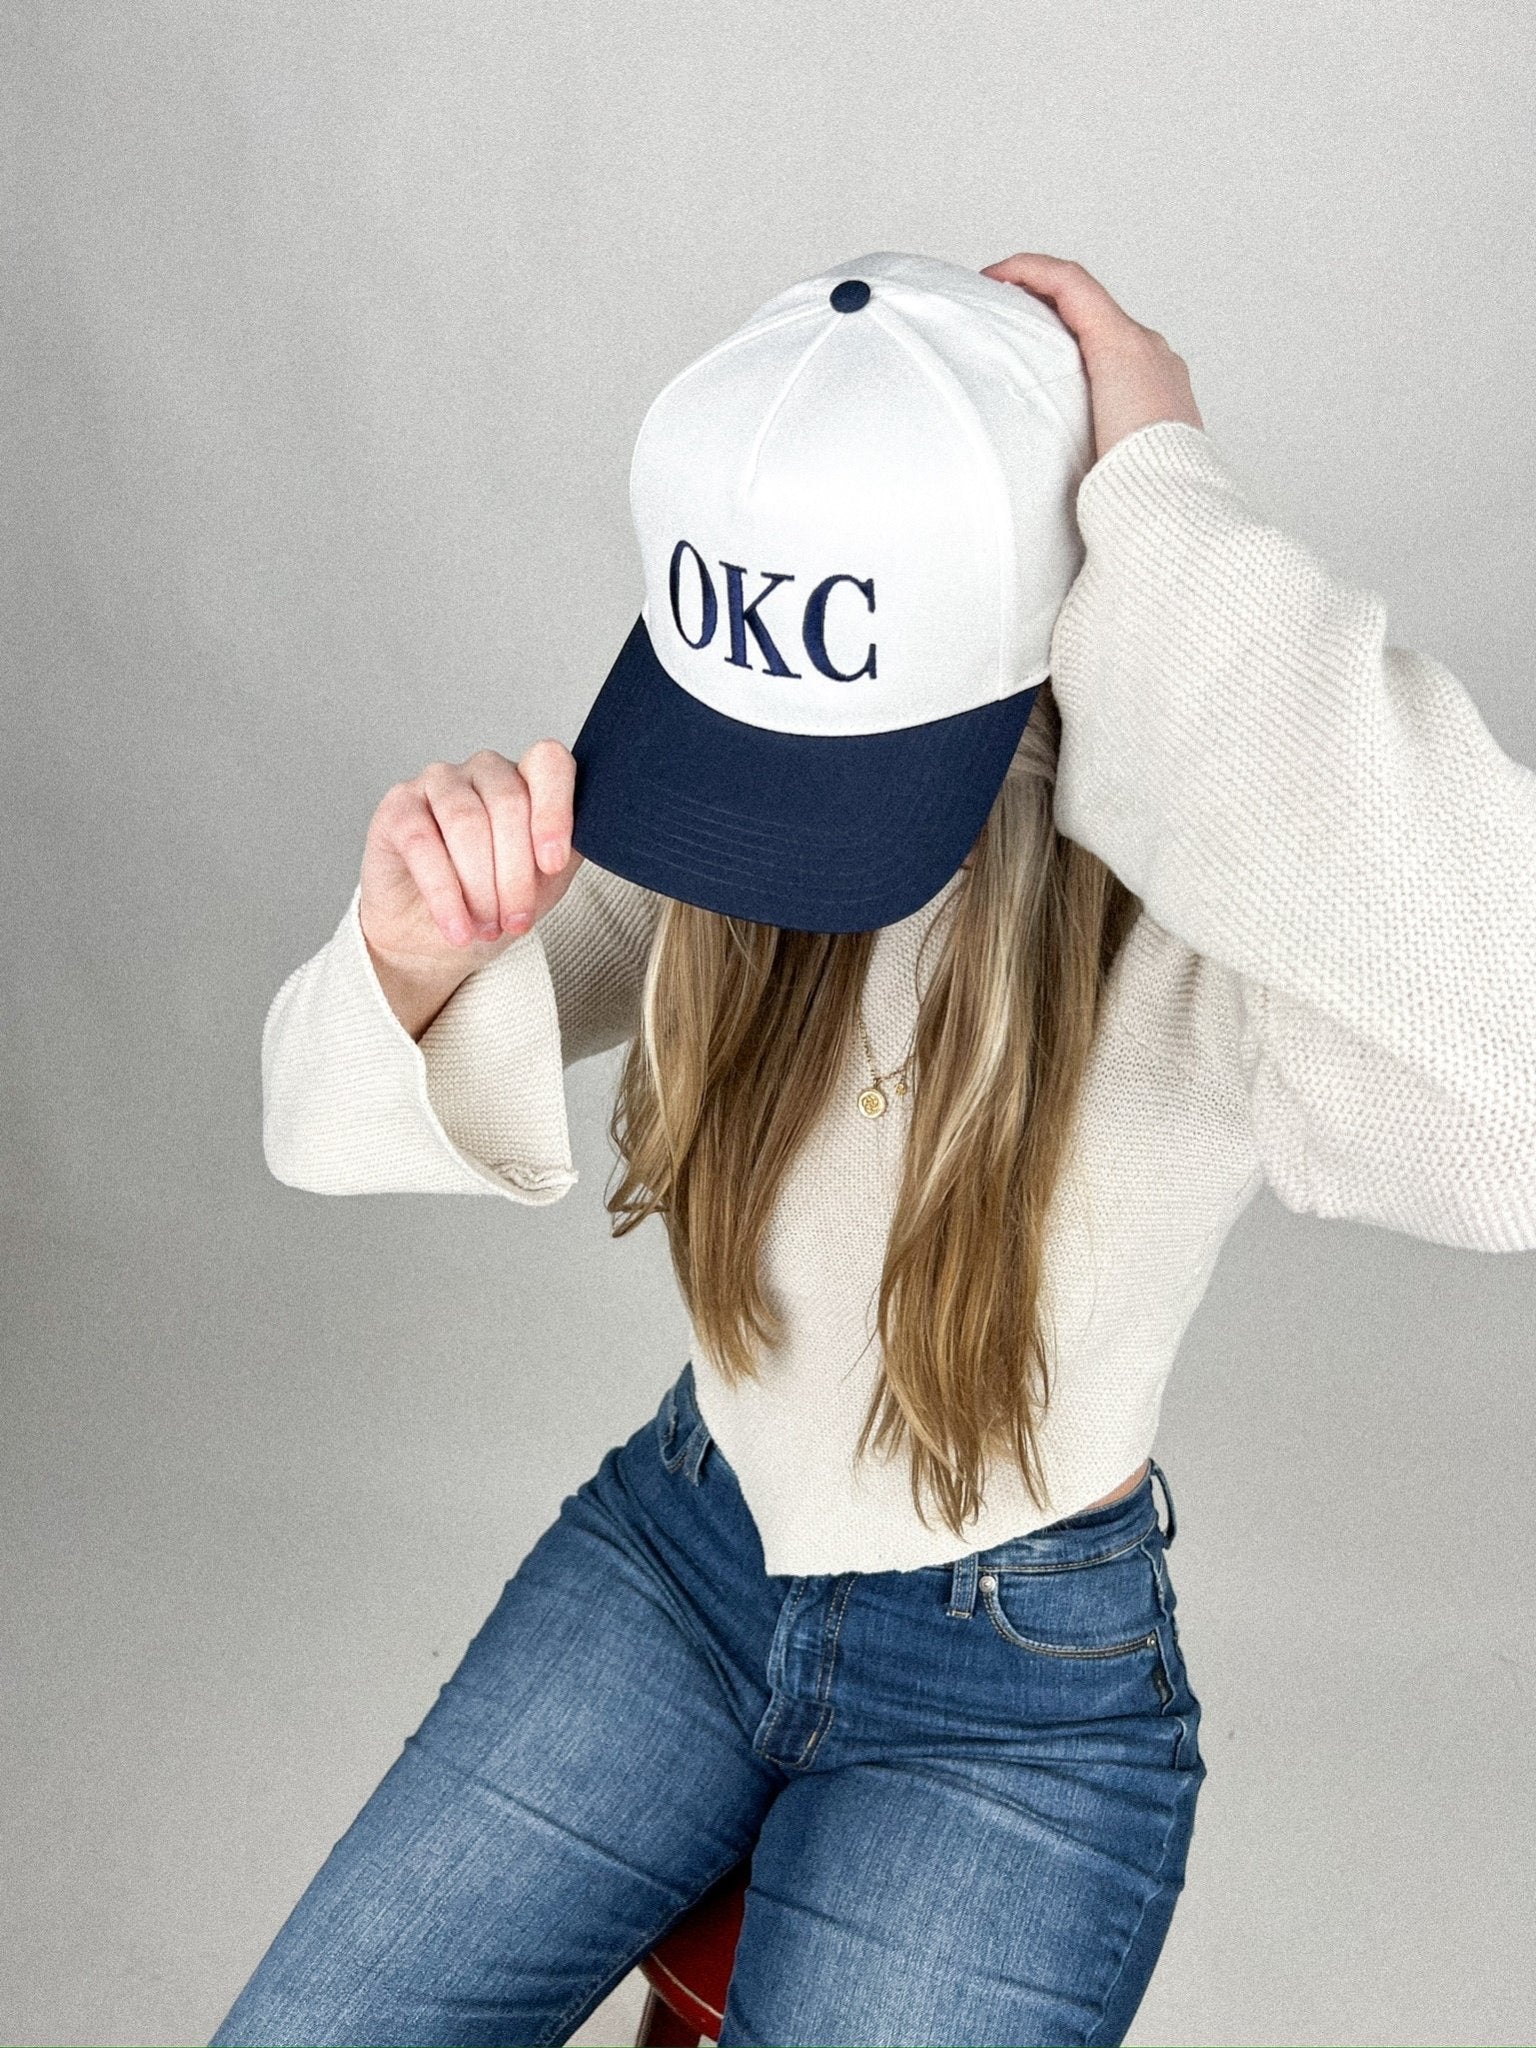 OKC two tone vogue hat white/navy - Oklahoma City inspired graphic t-shirts at Lush Fashion Lounge Boutique in Oklahoma City